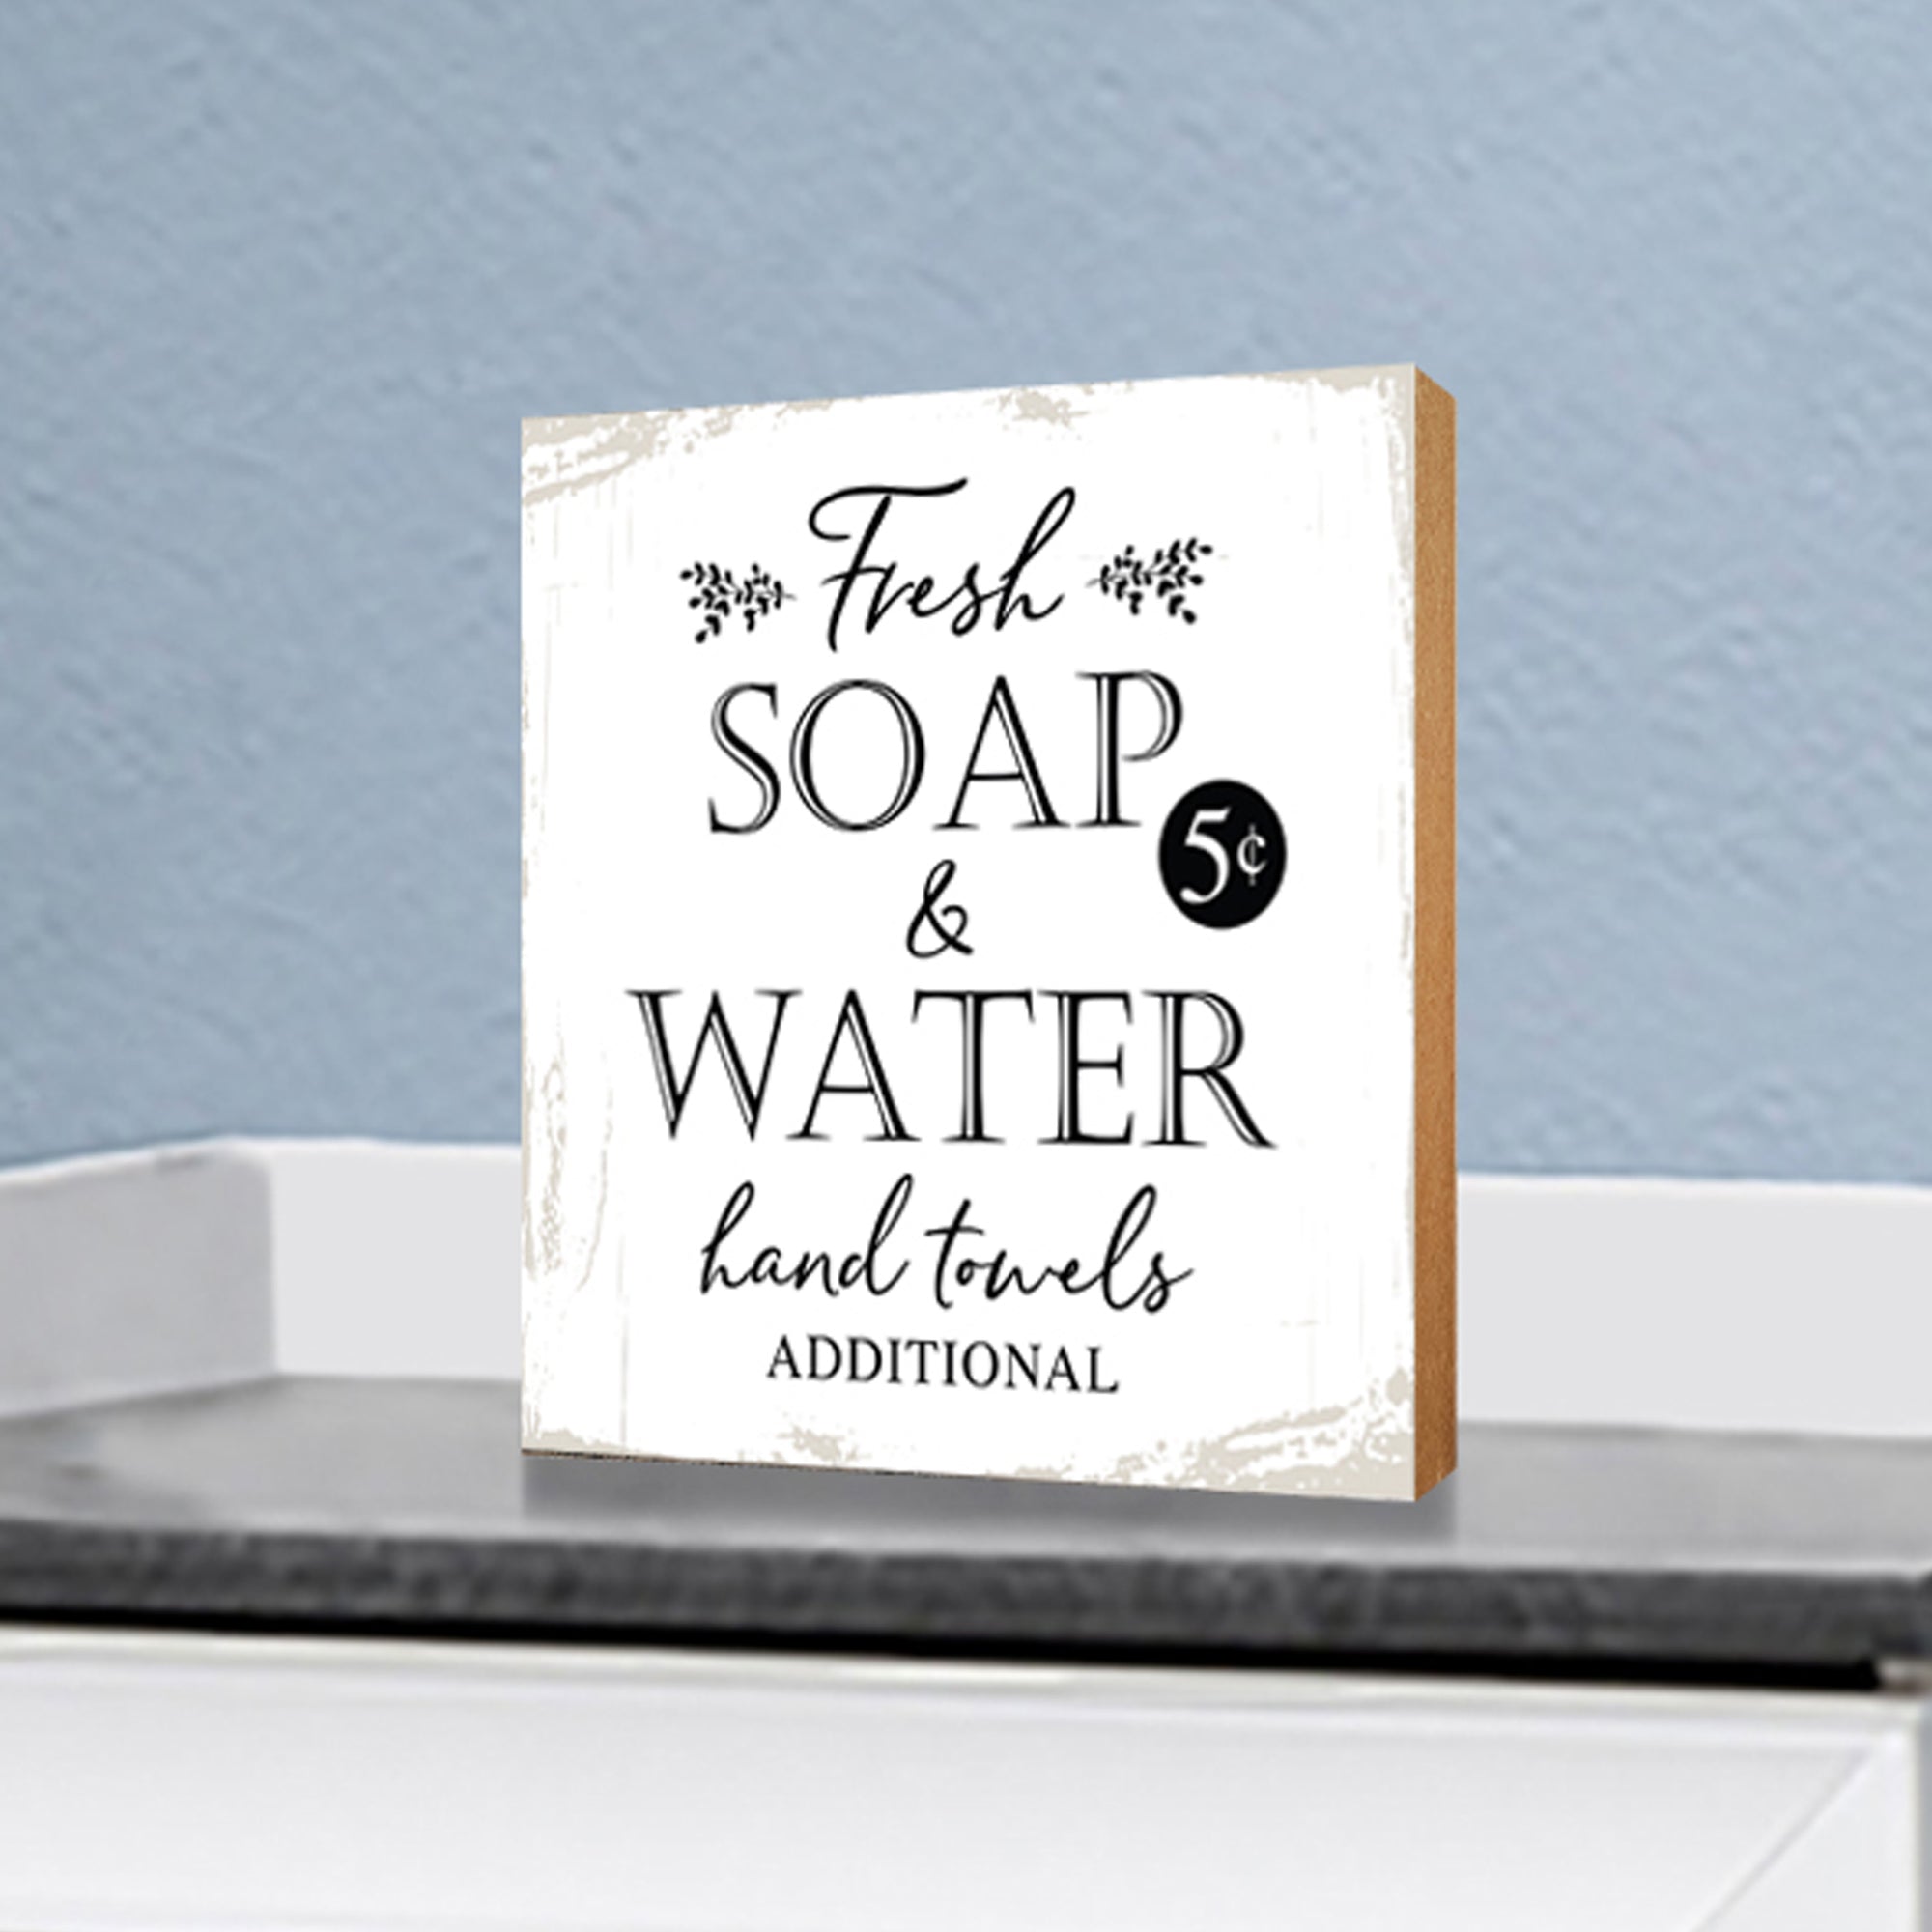 Wooden BATHROOM 6x6 Block shelf decor (Fresh Soap & Water Additional) Inspirational Plaque Tabletop and Family Home Decoration